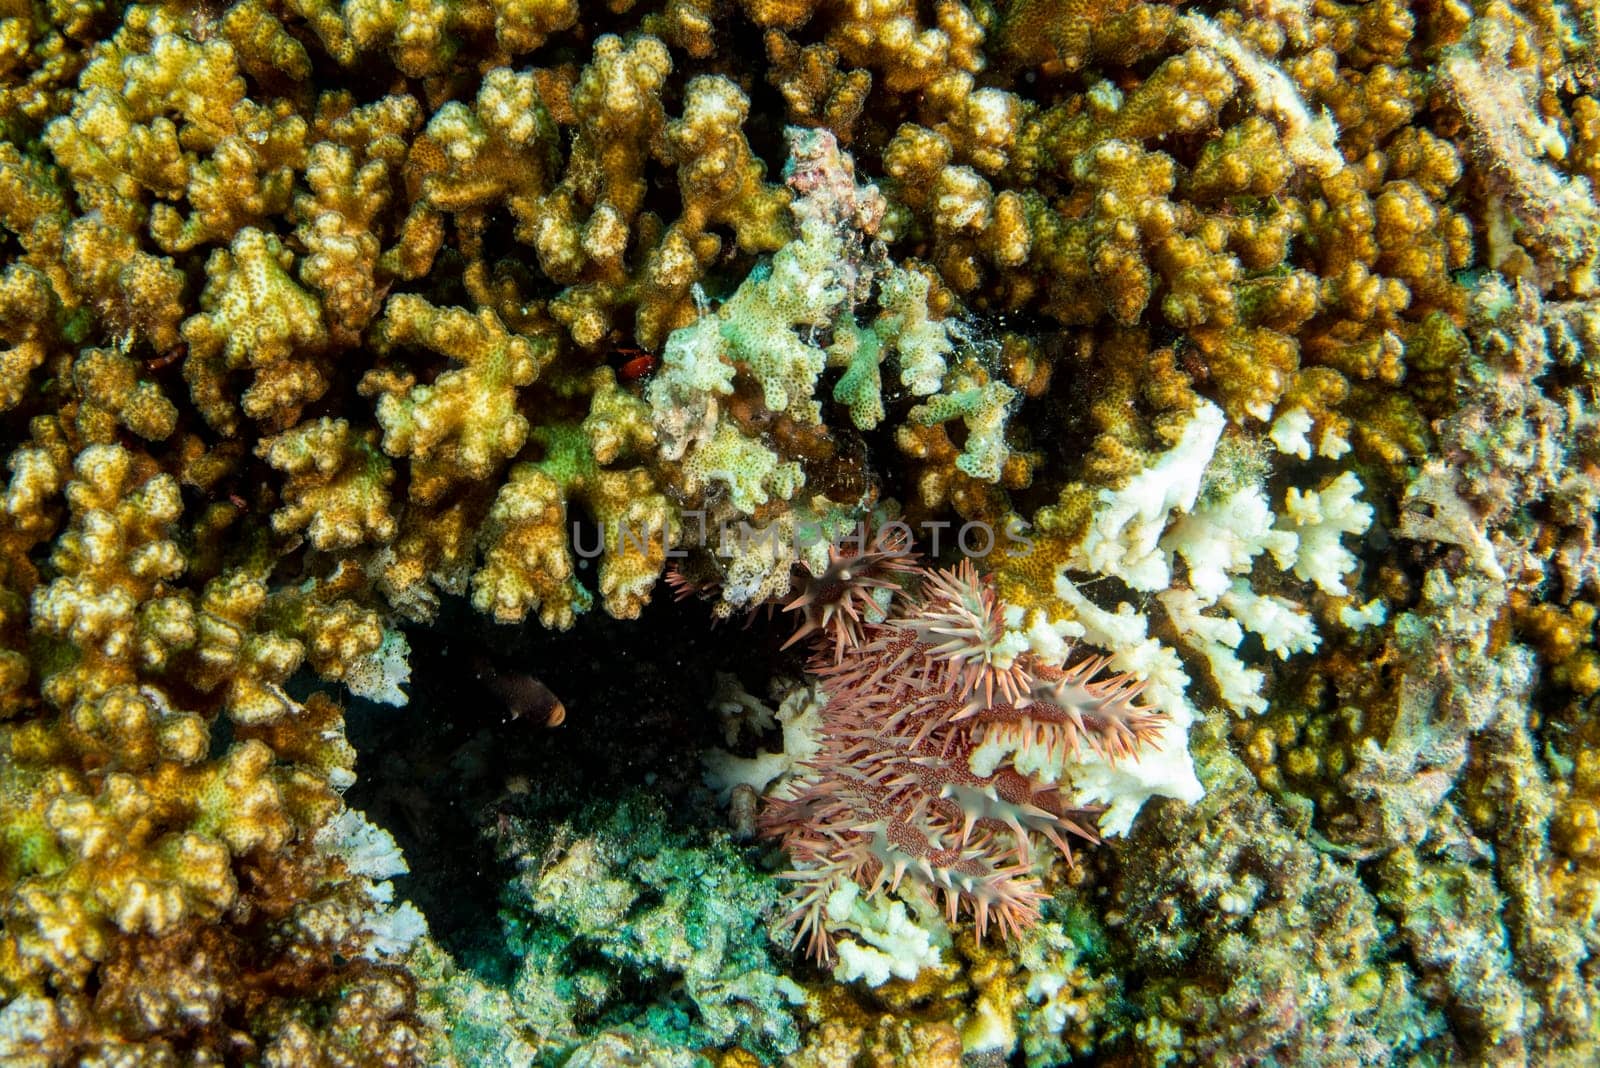 crown of thorns sea star eating a coraland bleaching it white